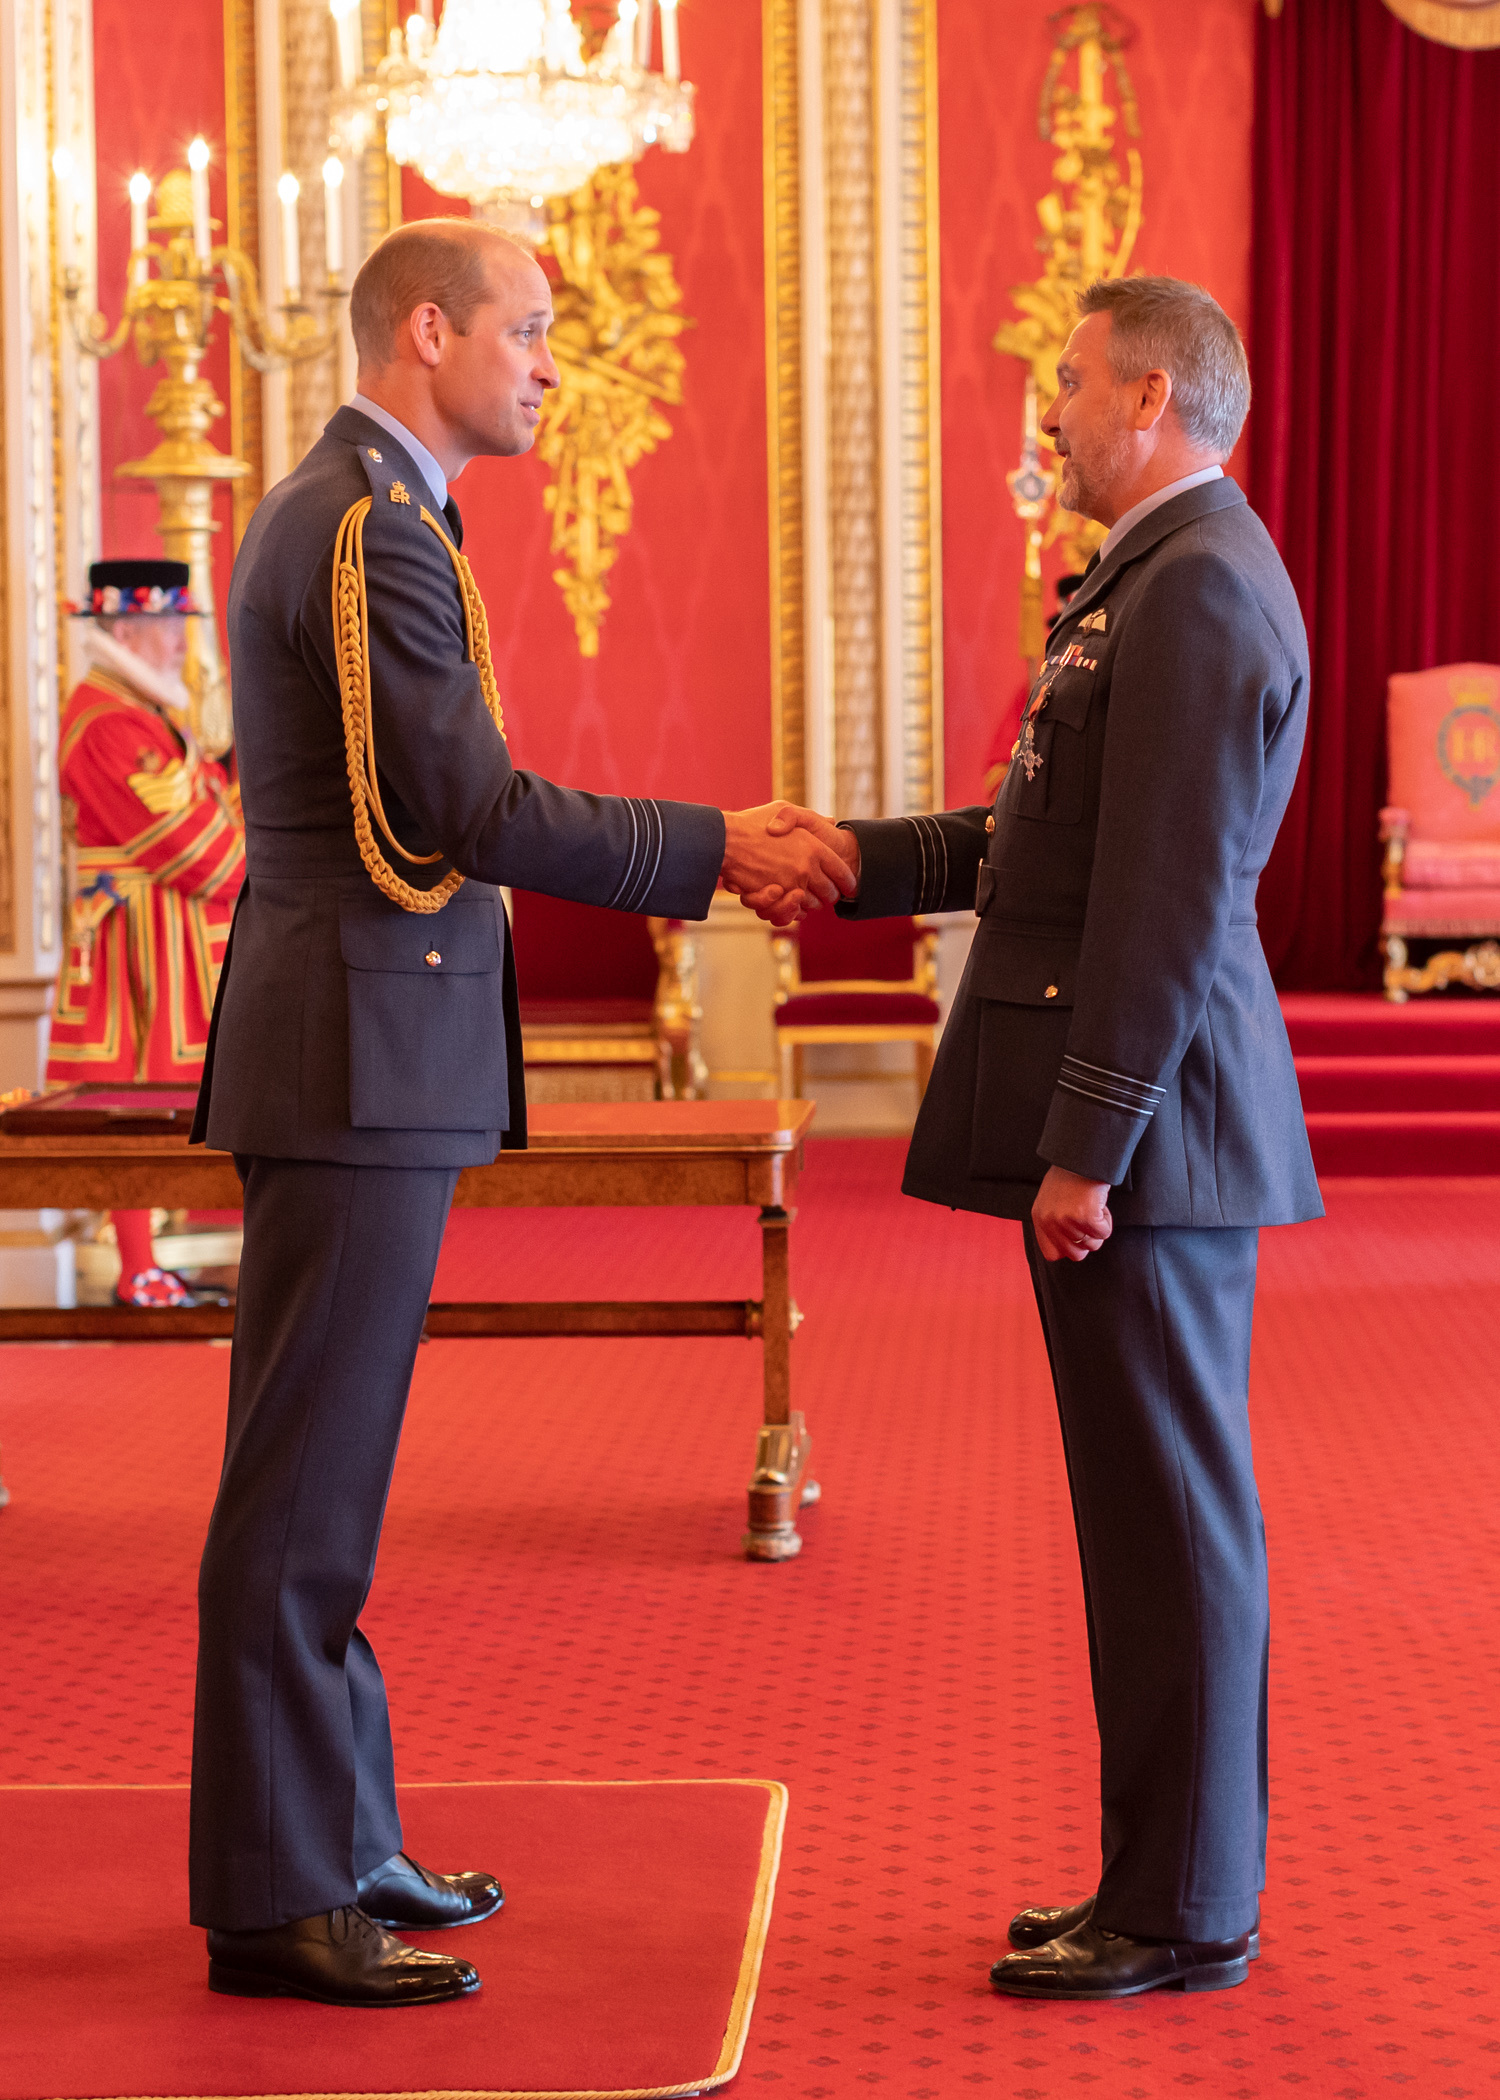 Image shows RAF aviator shaking hands with His Royal Highness Duke of Cambridge.